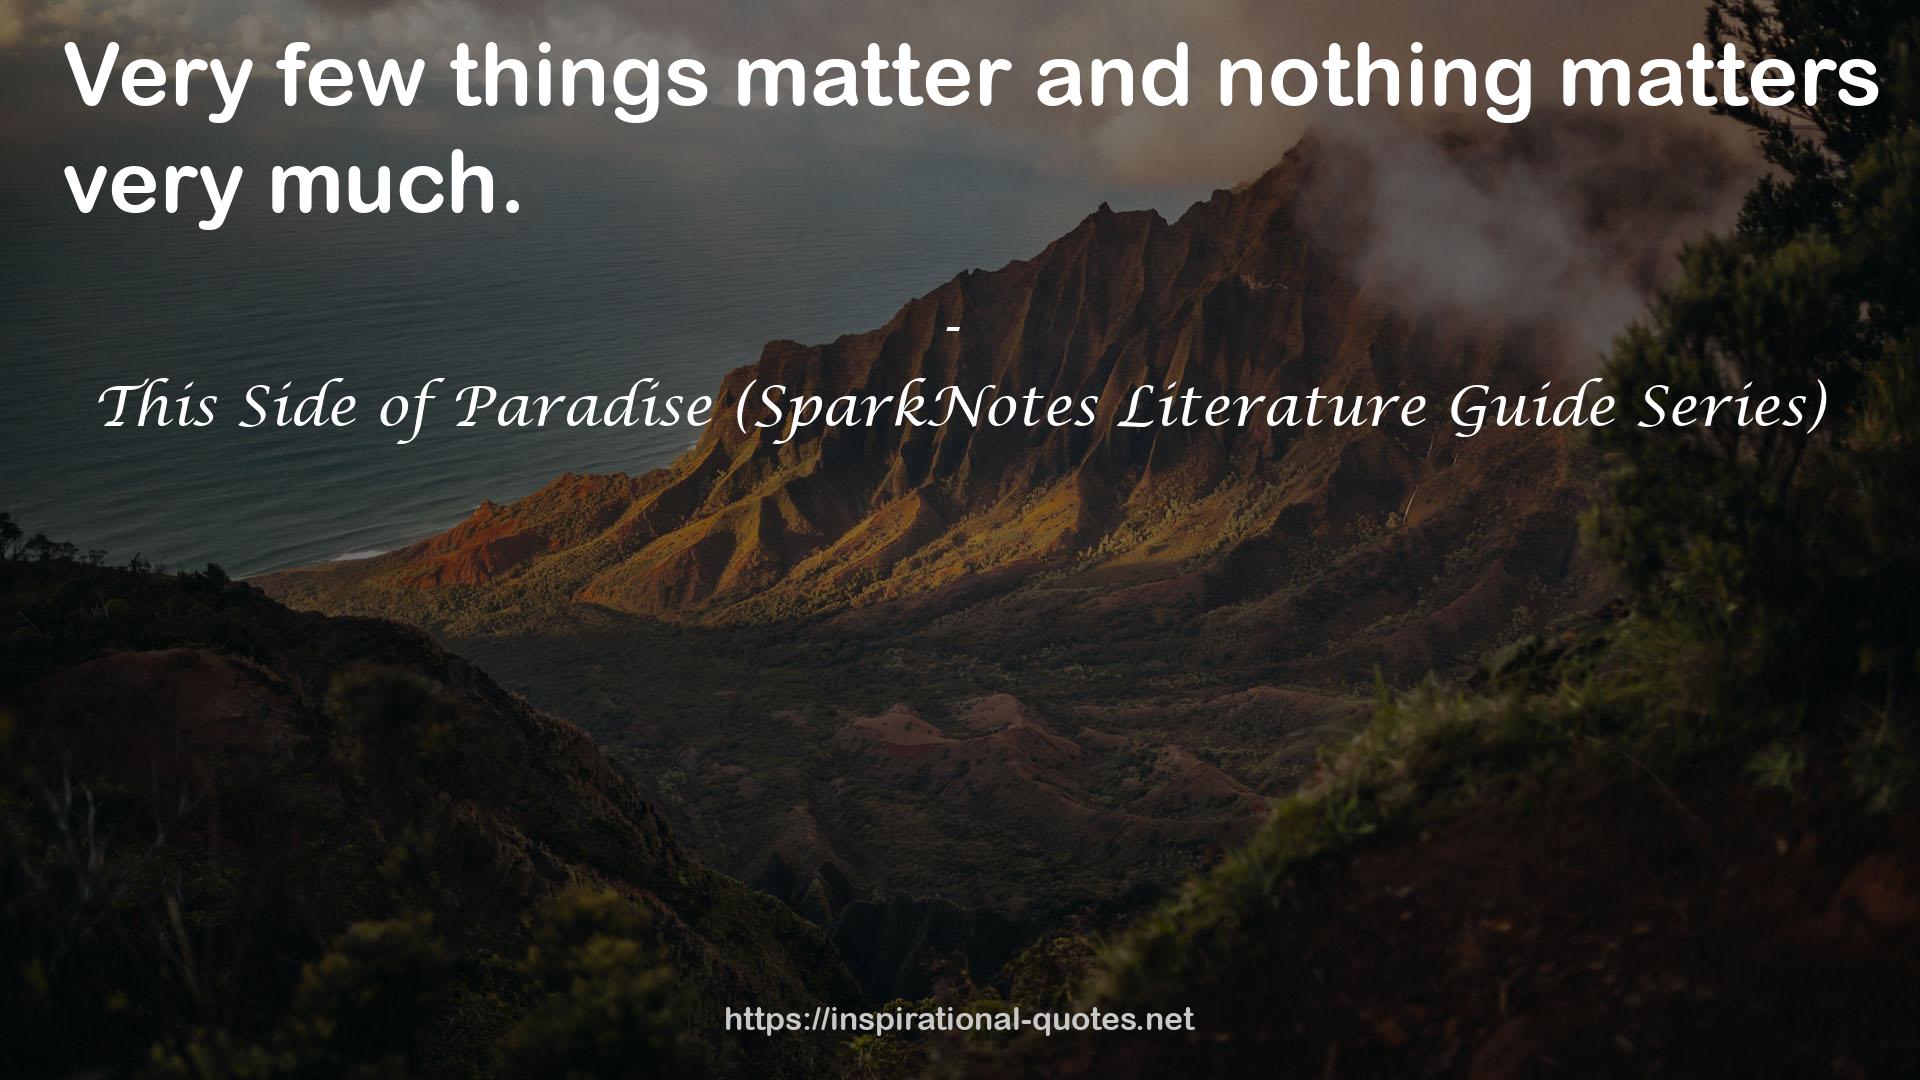 This Side of Paradise (SparkNotes Literature Guide Series) QUOTES